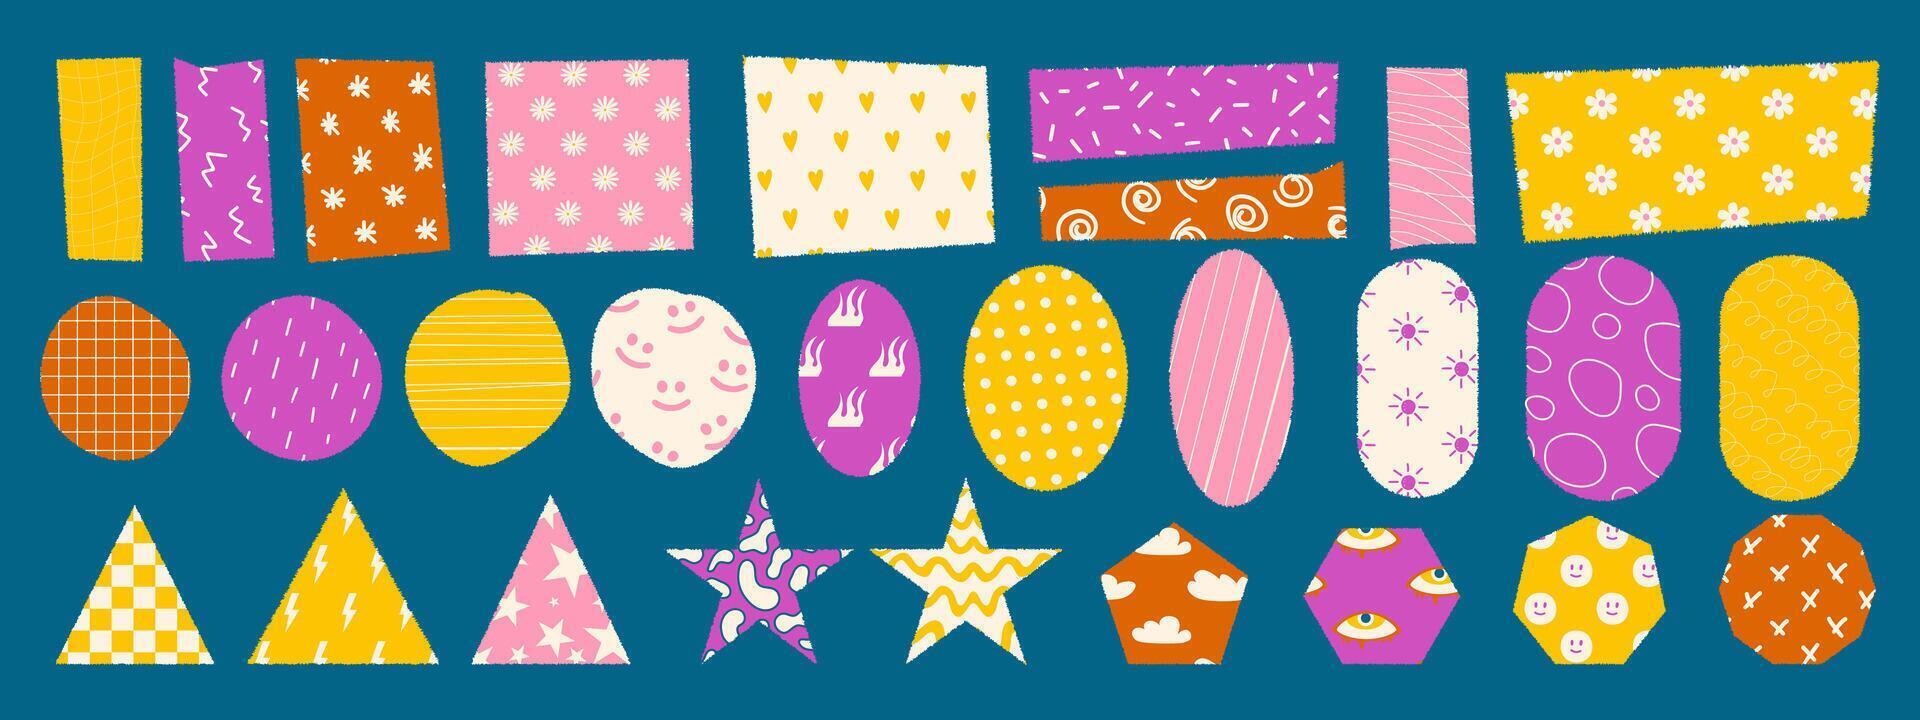 Sheets of paper with torn shapes. Trendy elements with funny pattern for collage. illustration vector